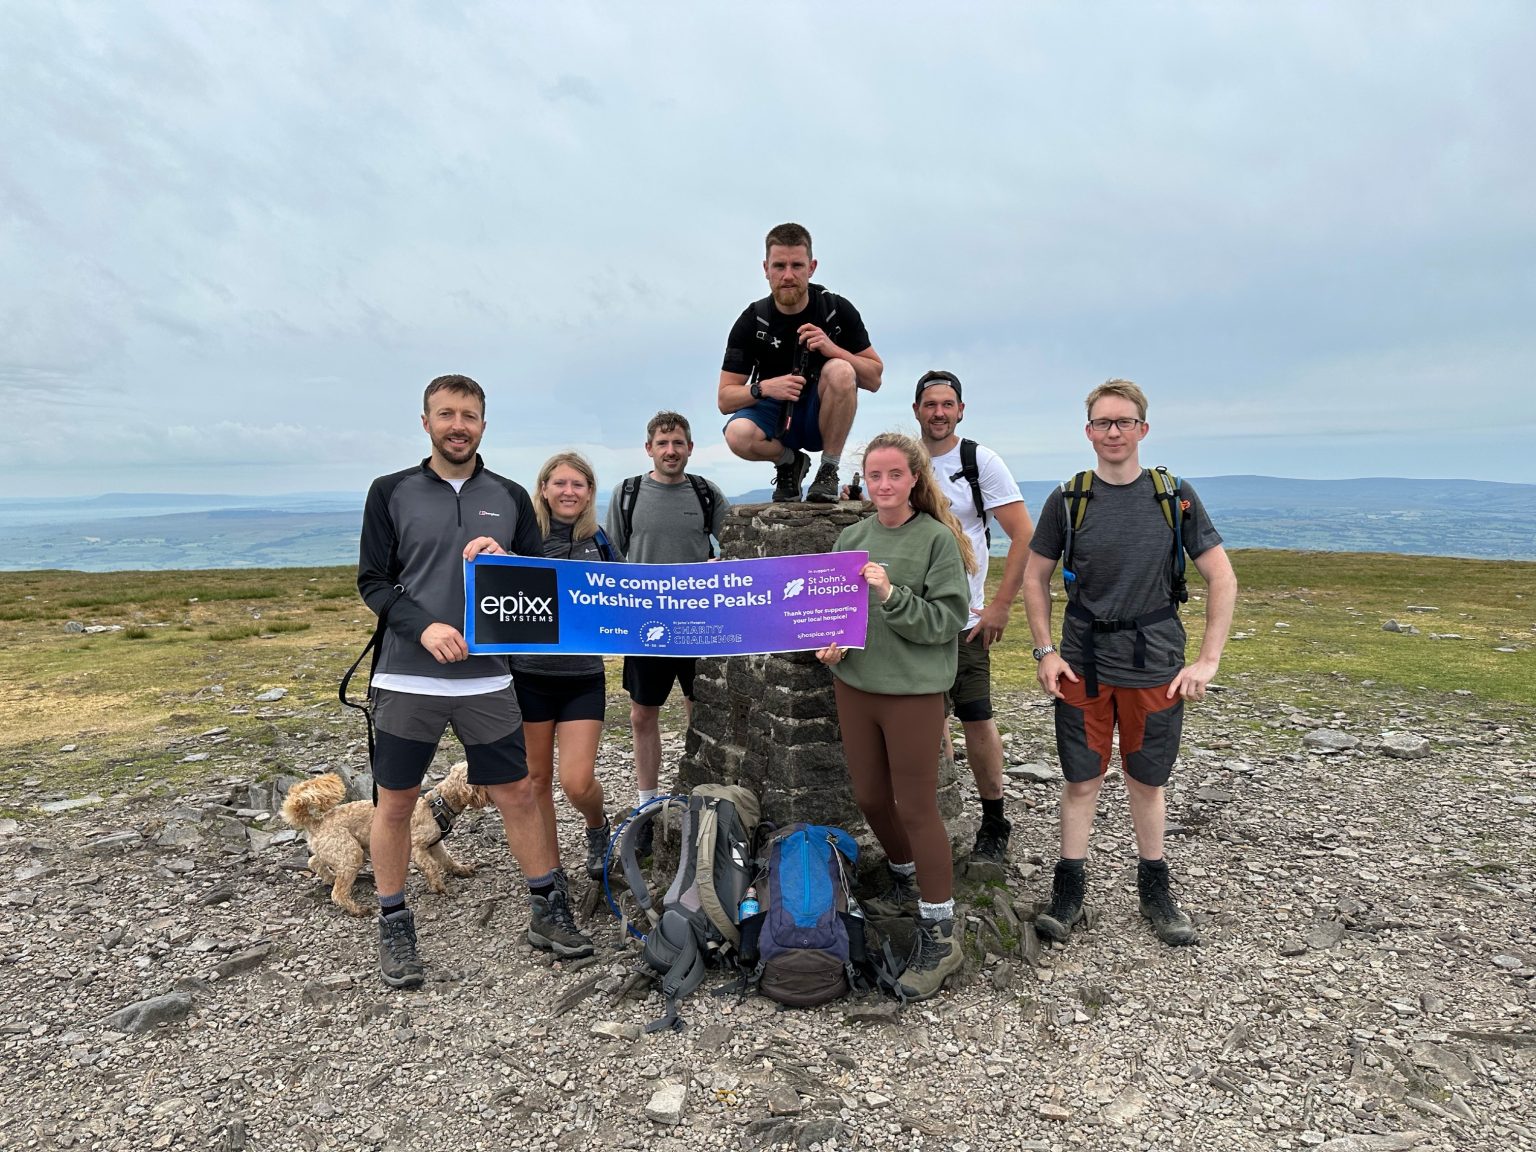 Epixx Systems completed the Yorkshire Three Peak challenge for St Johns Hospice.